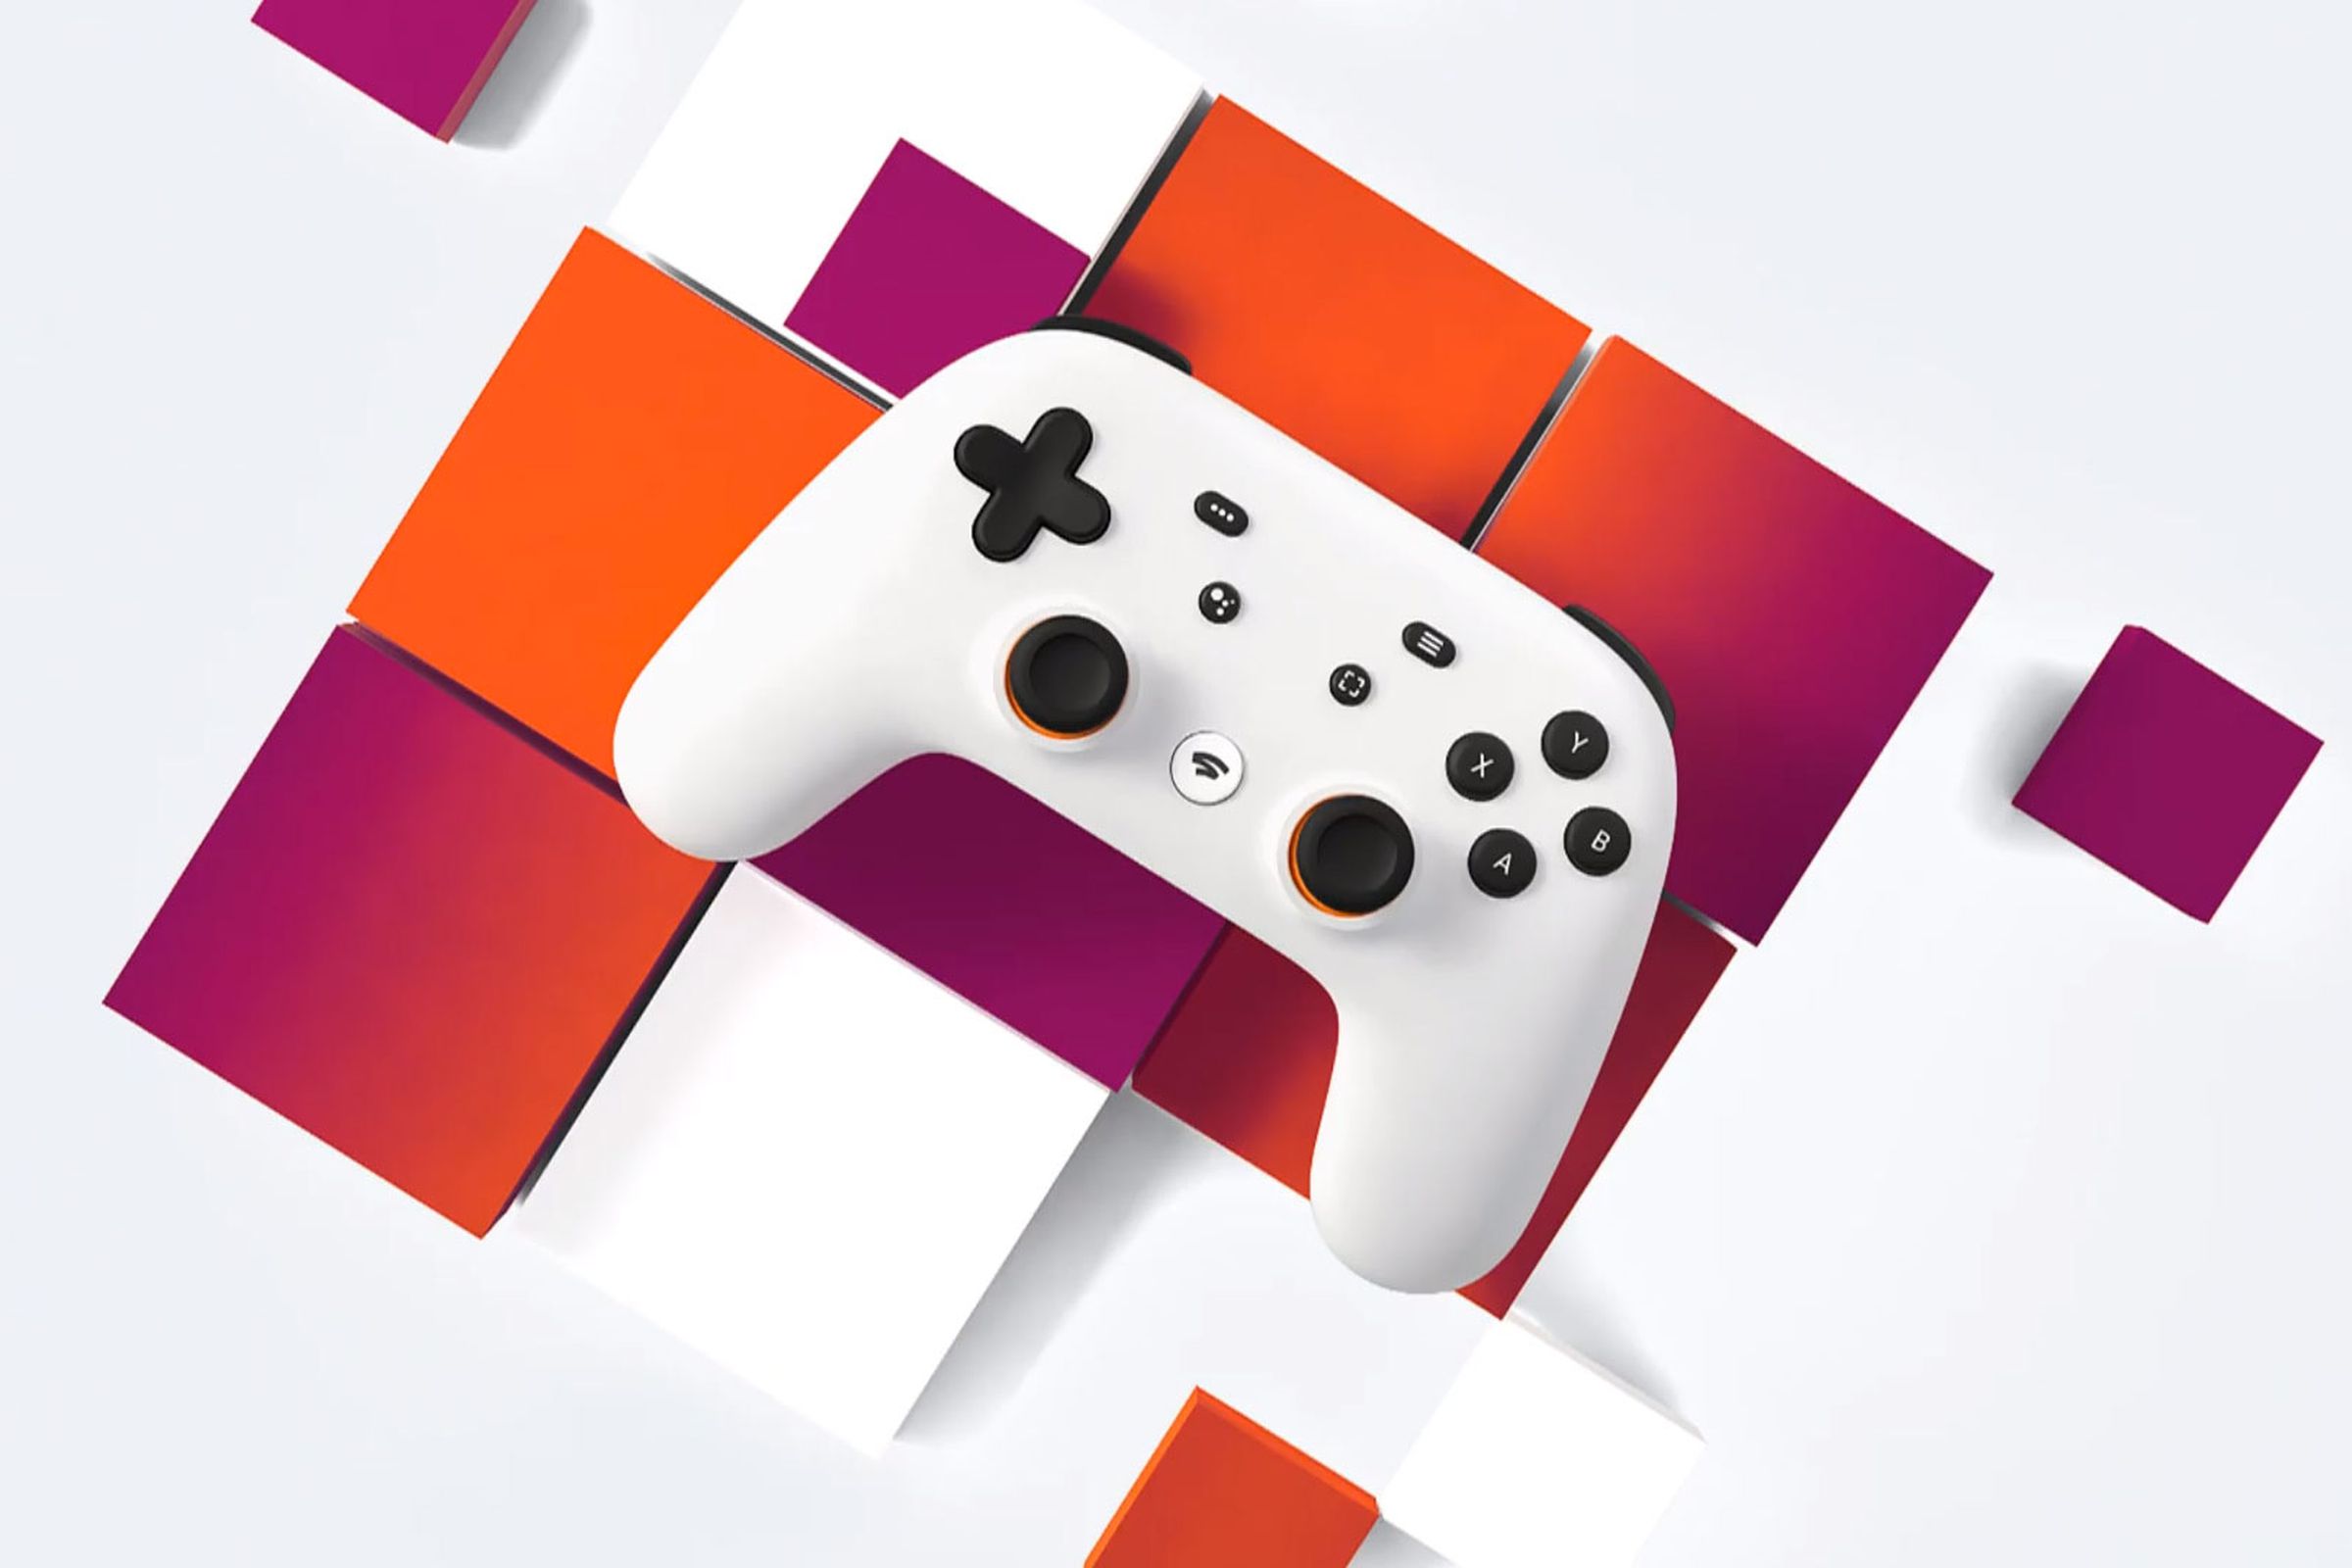 A press shot of the Stadia controller on a white background